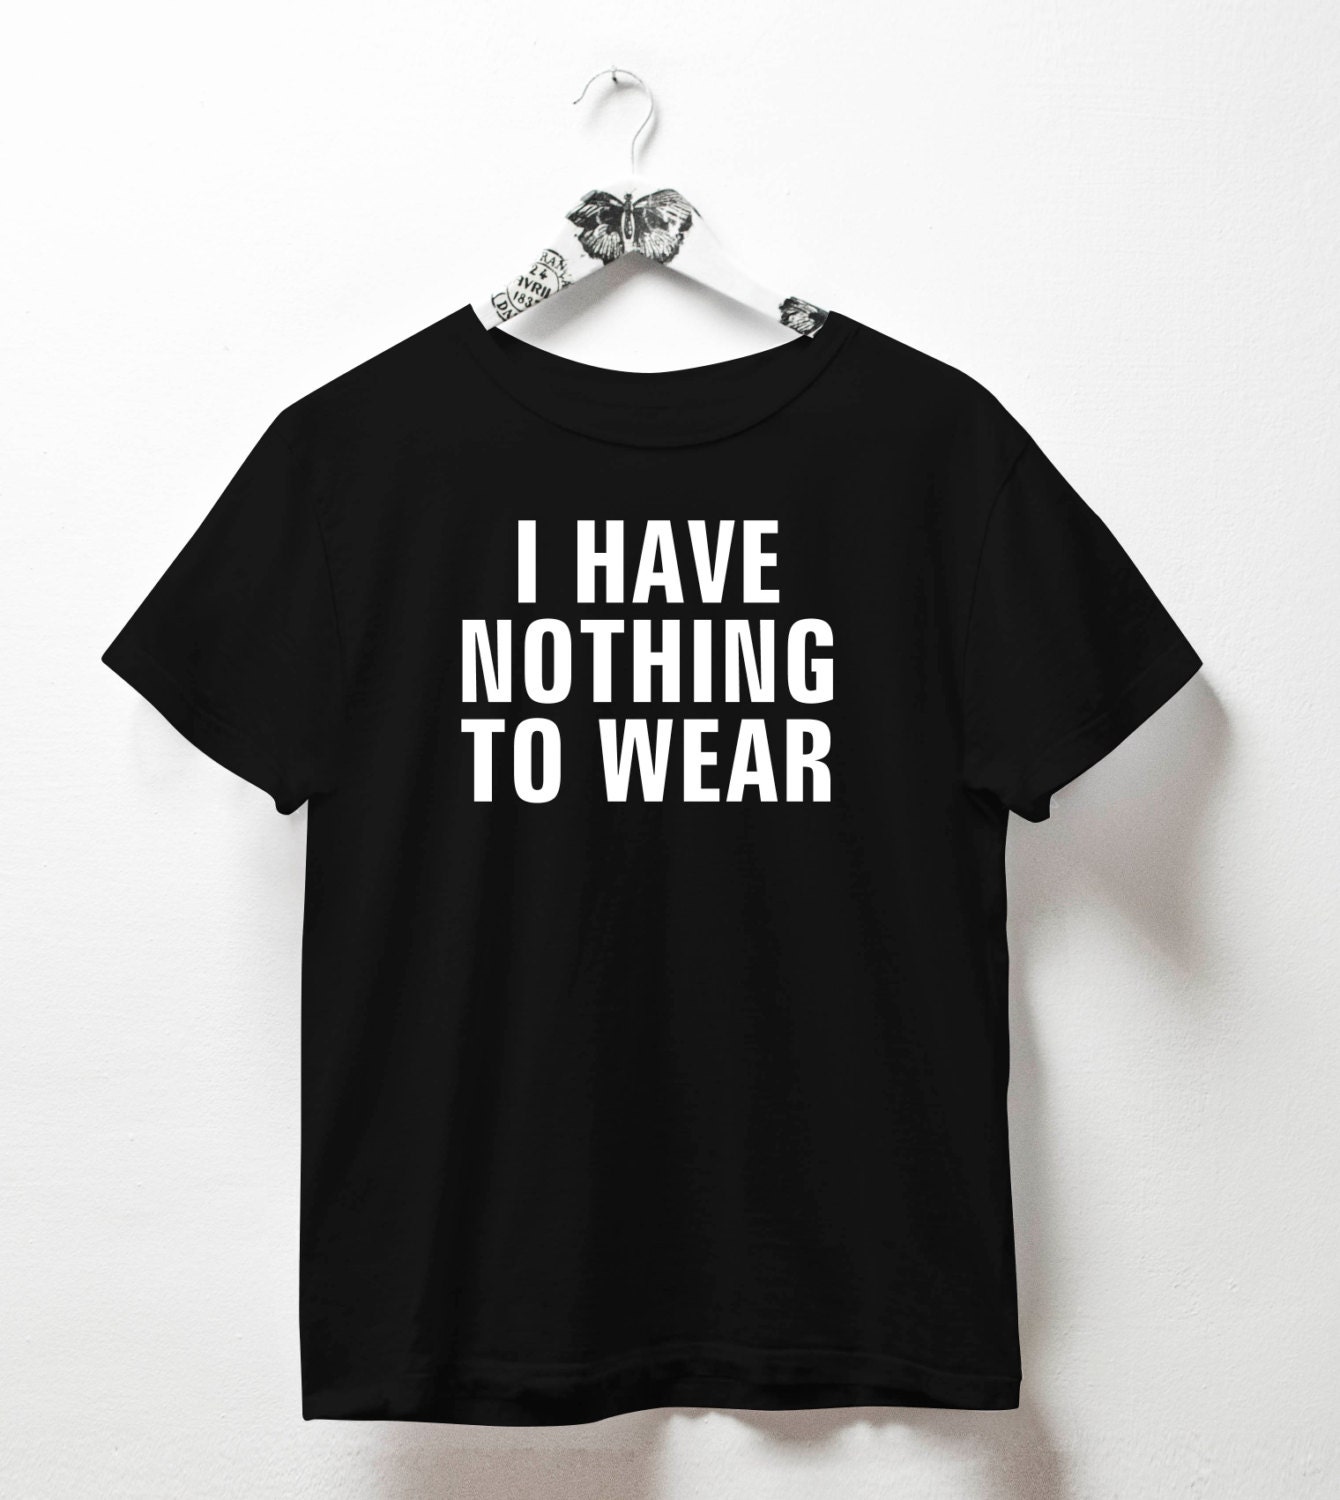 I have nothing to wear shirt quote t shirt funny tops fashion | Etsy